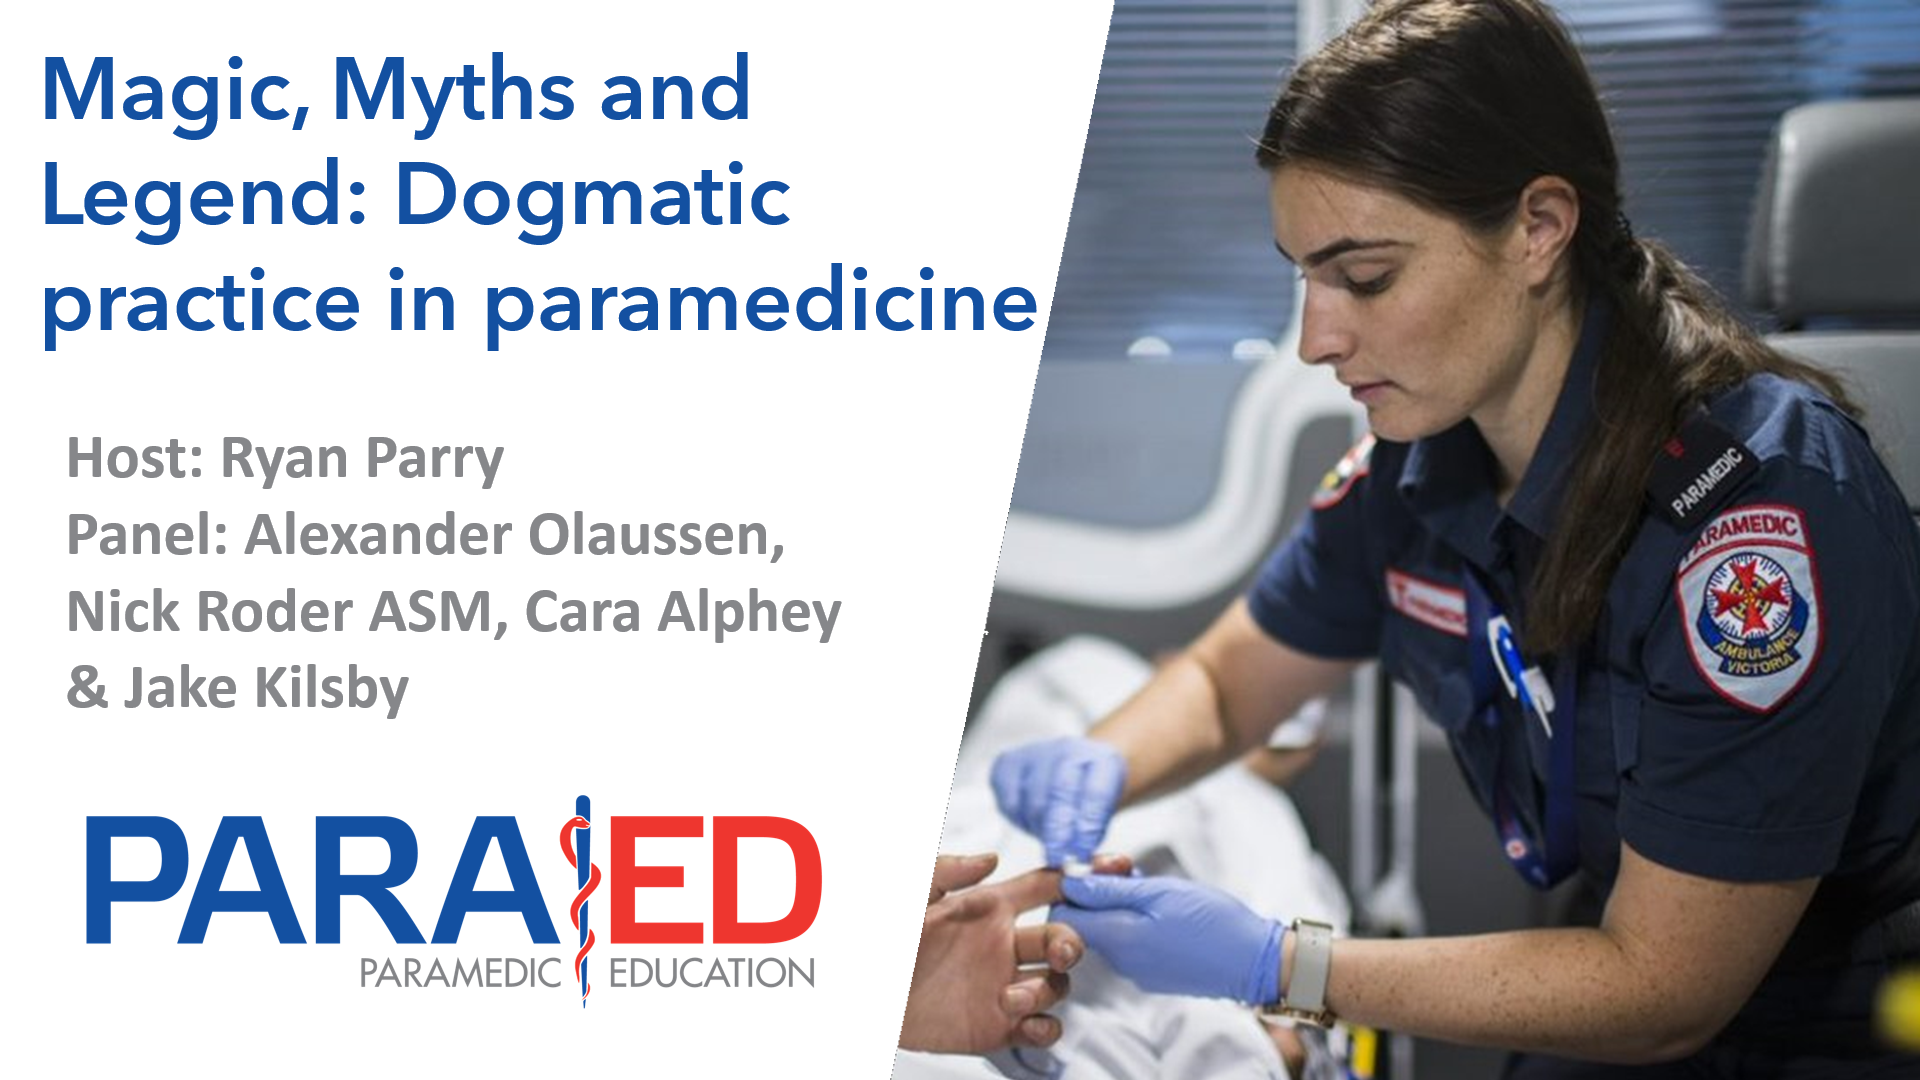 Magic, Myths and Legend: Dogmatic practice in paramedicine